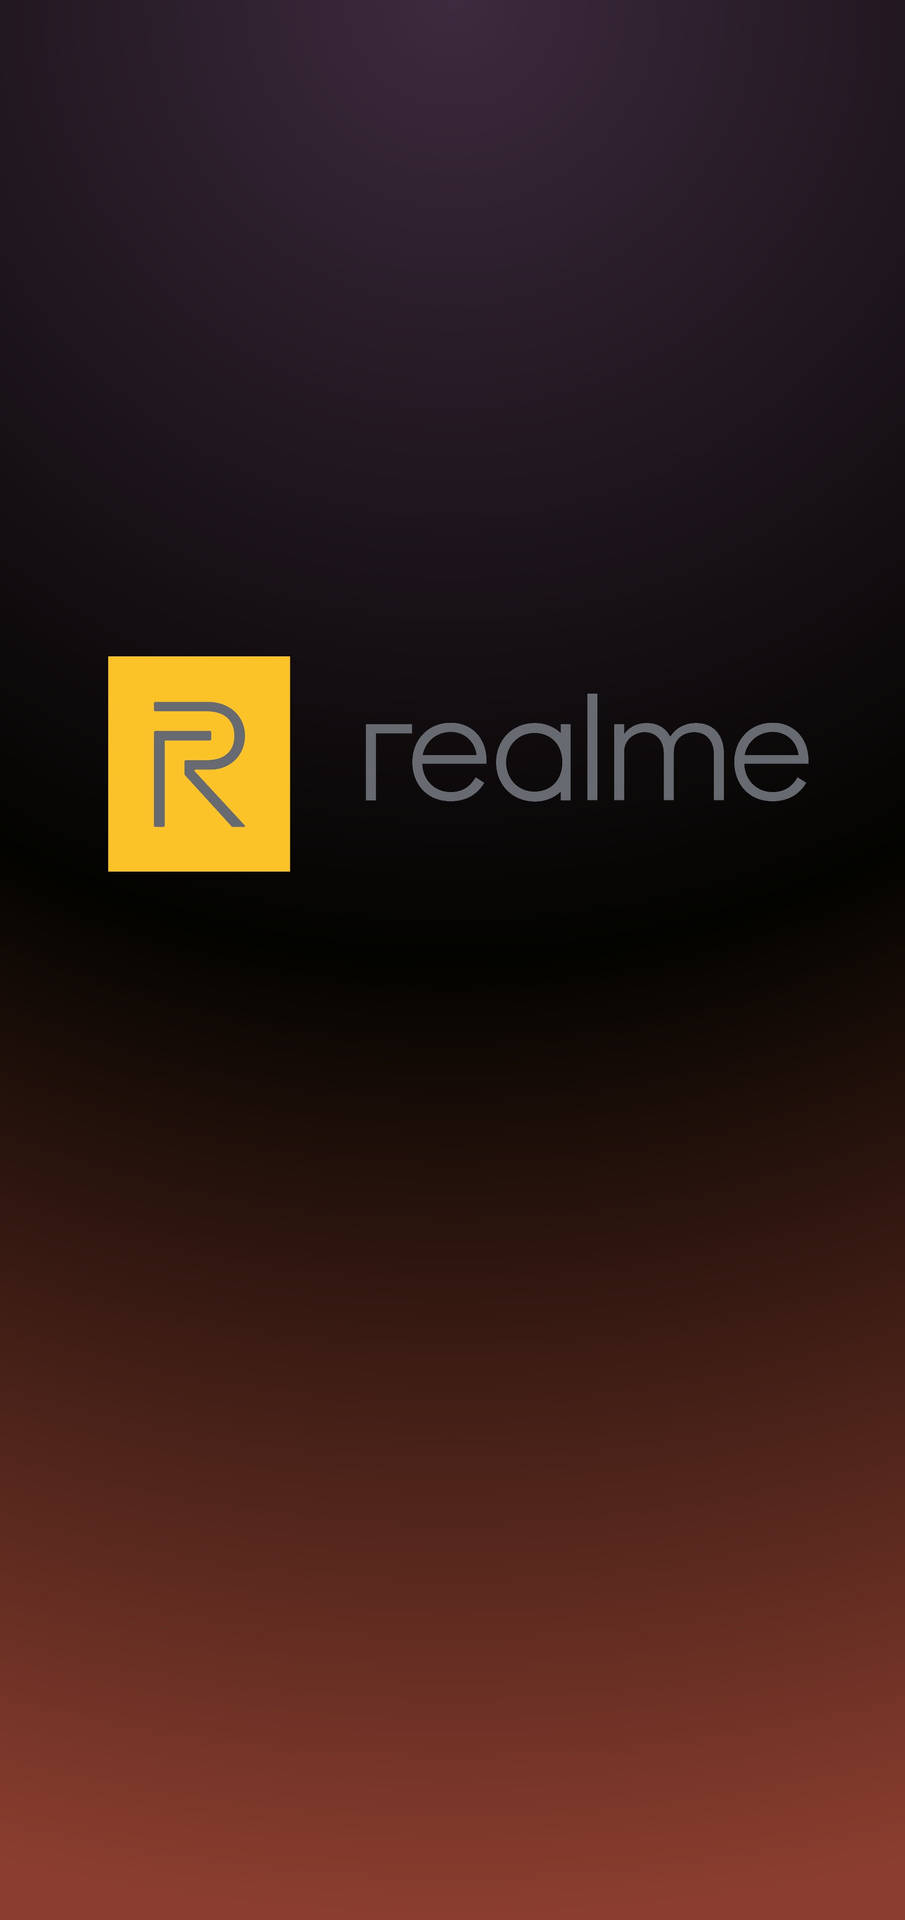 Here are Some Cool AI Art Wallpapers for your Realme Smartphone: Check it  Out